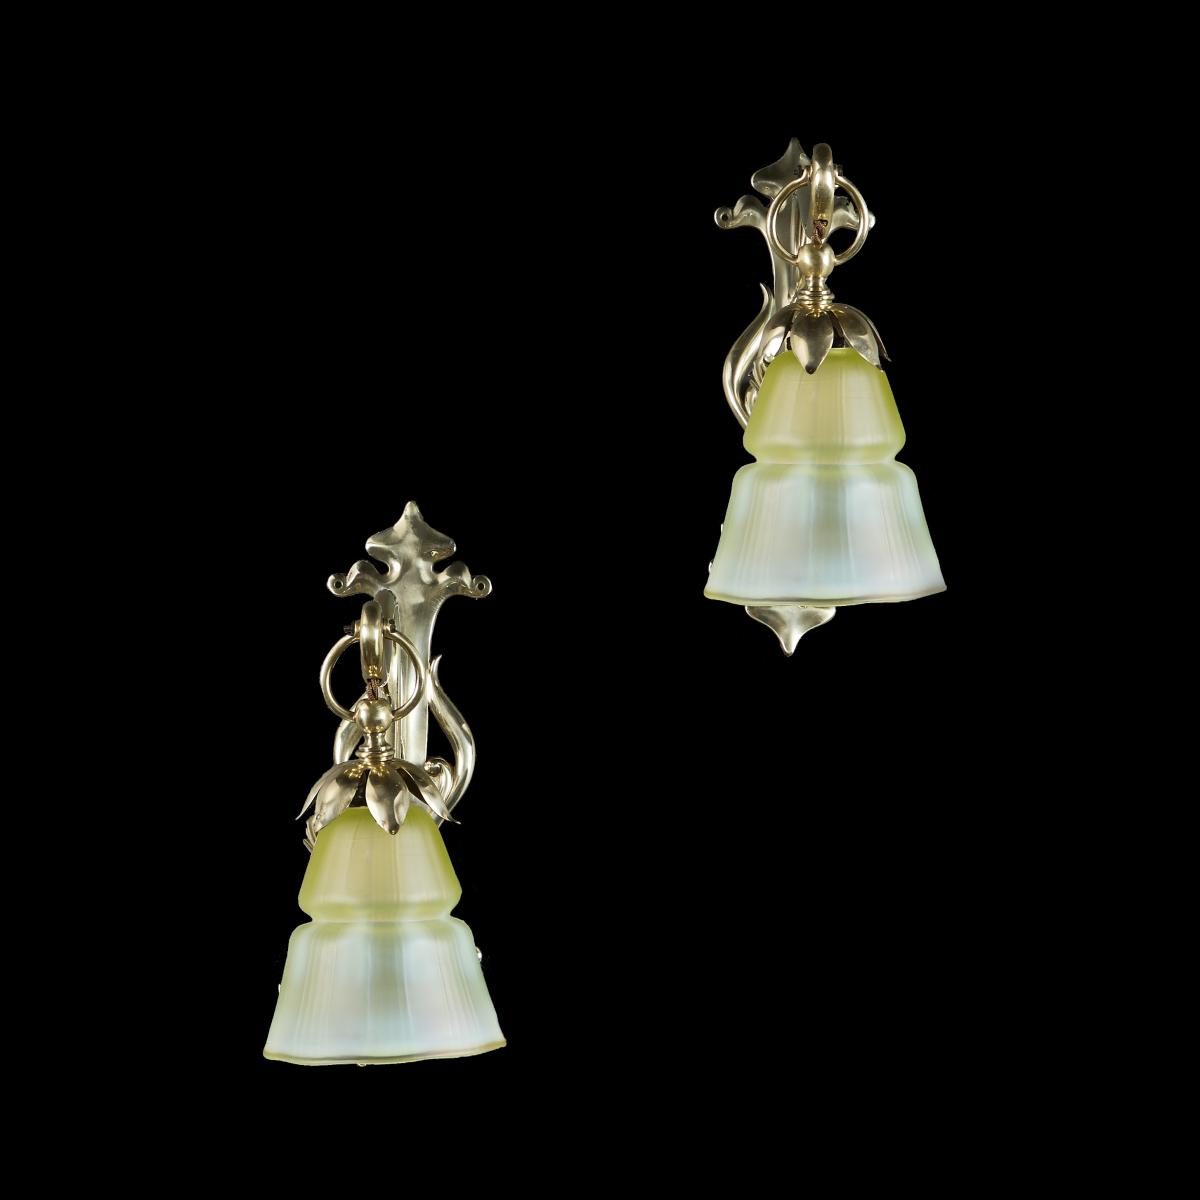 A Pair of Brass Wall Lights By W.A.S Benson